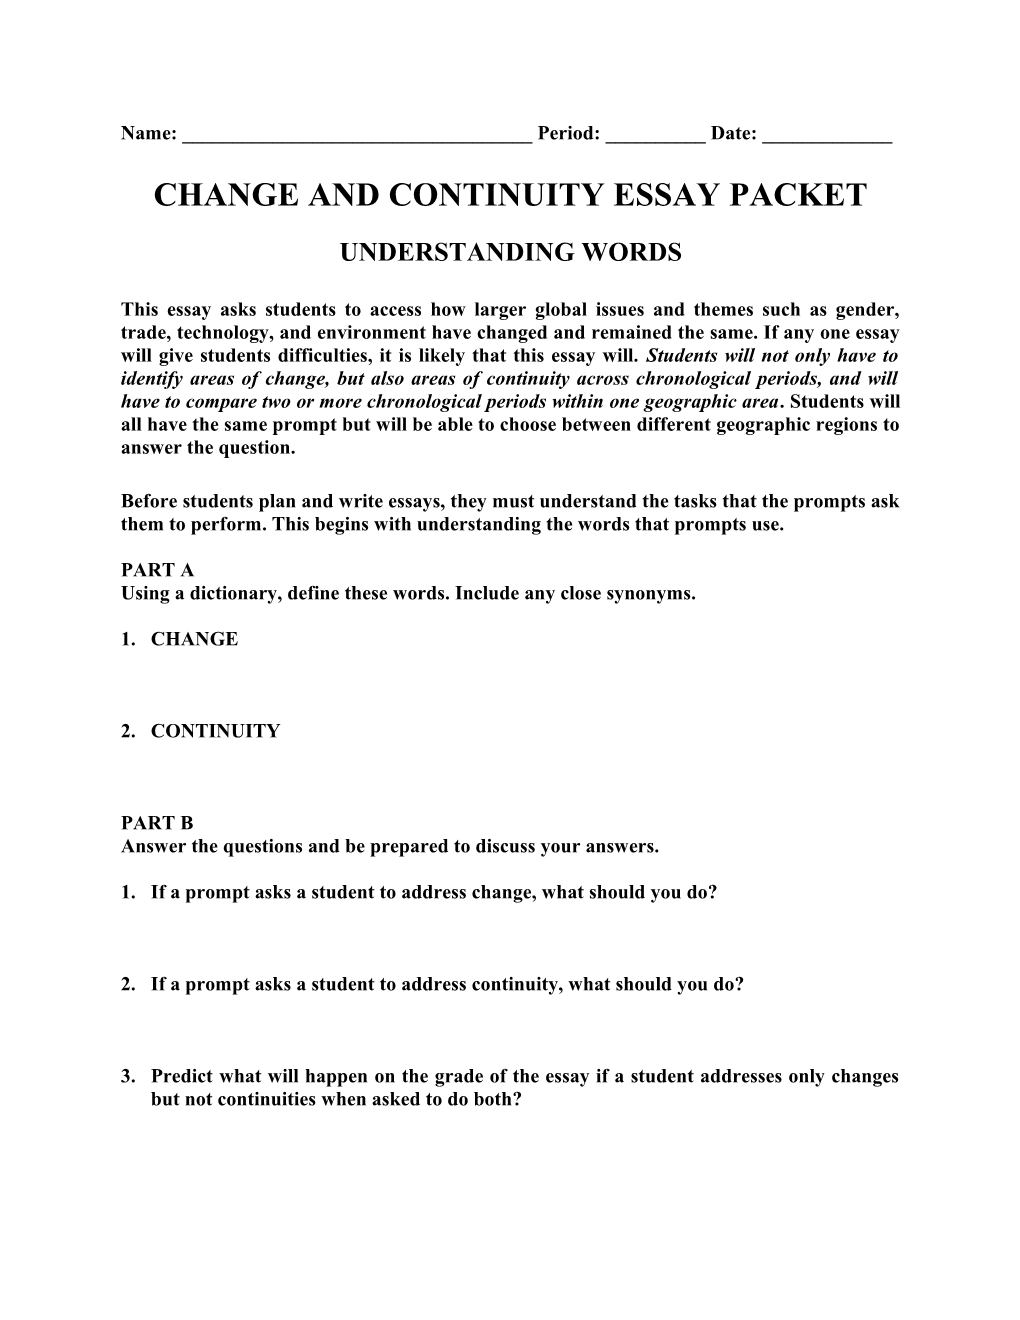 Change and Continuity Essay Packet